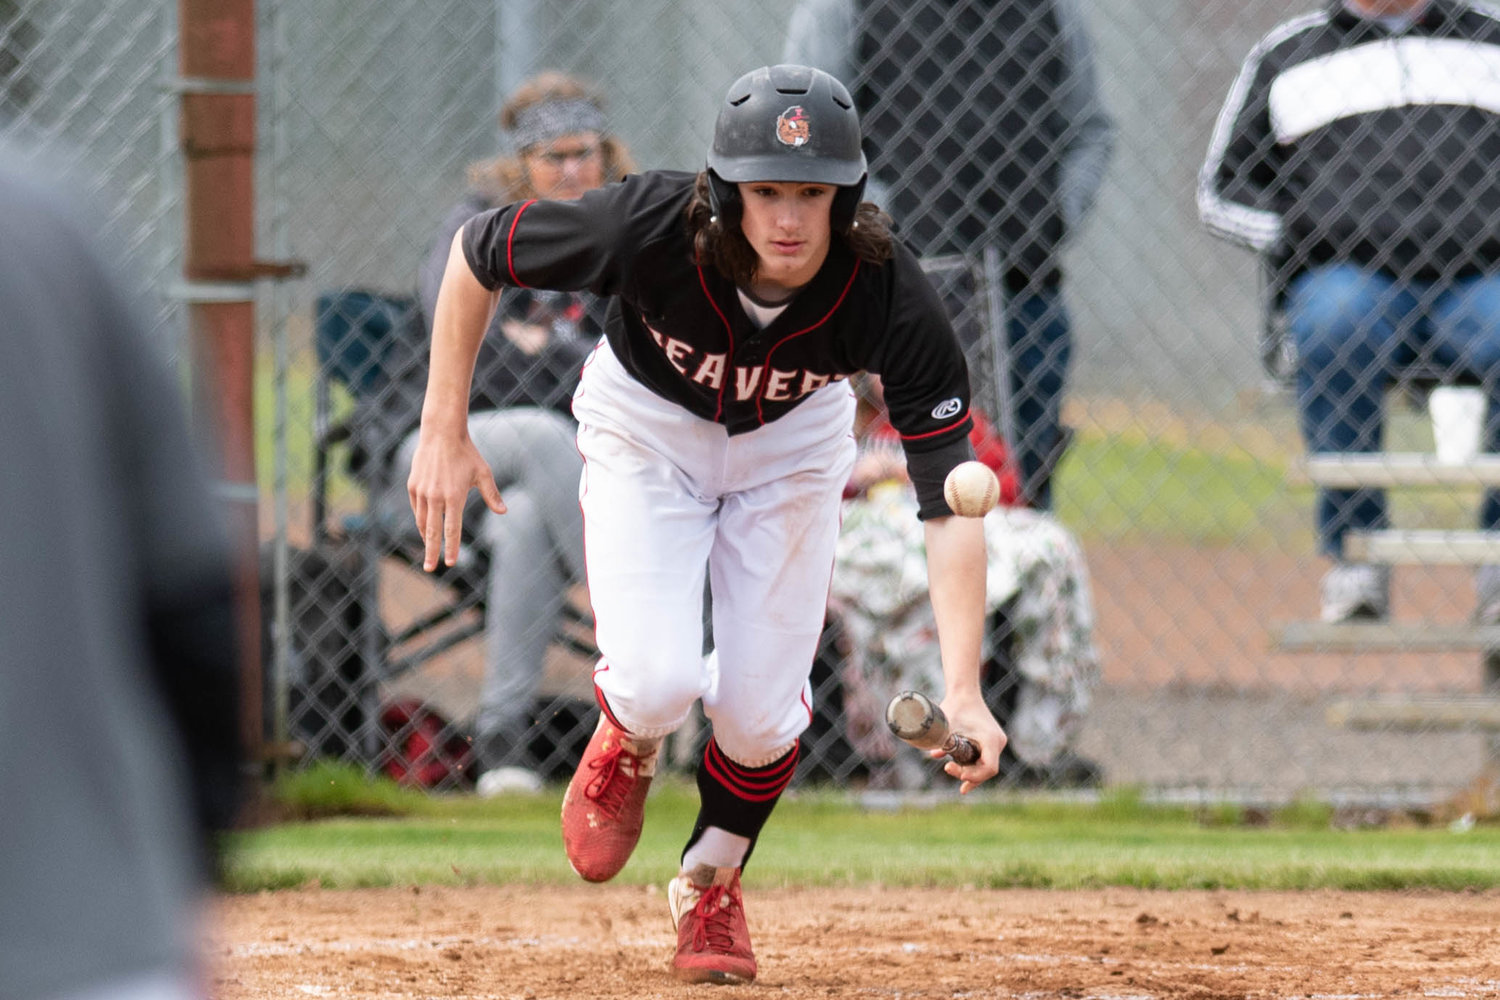 Tenino's Brody Noonan looks to run after laying down a bunt against Eatonville in the 1A District 4 playoffs at Castle Rock May 13.